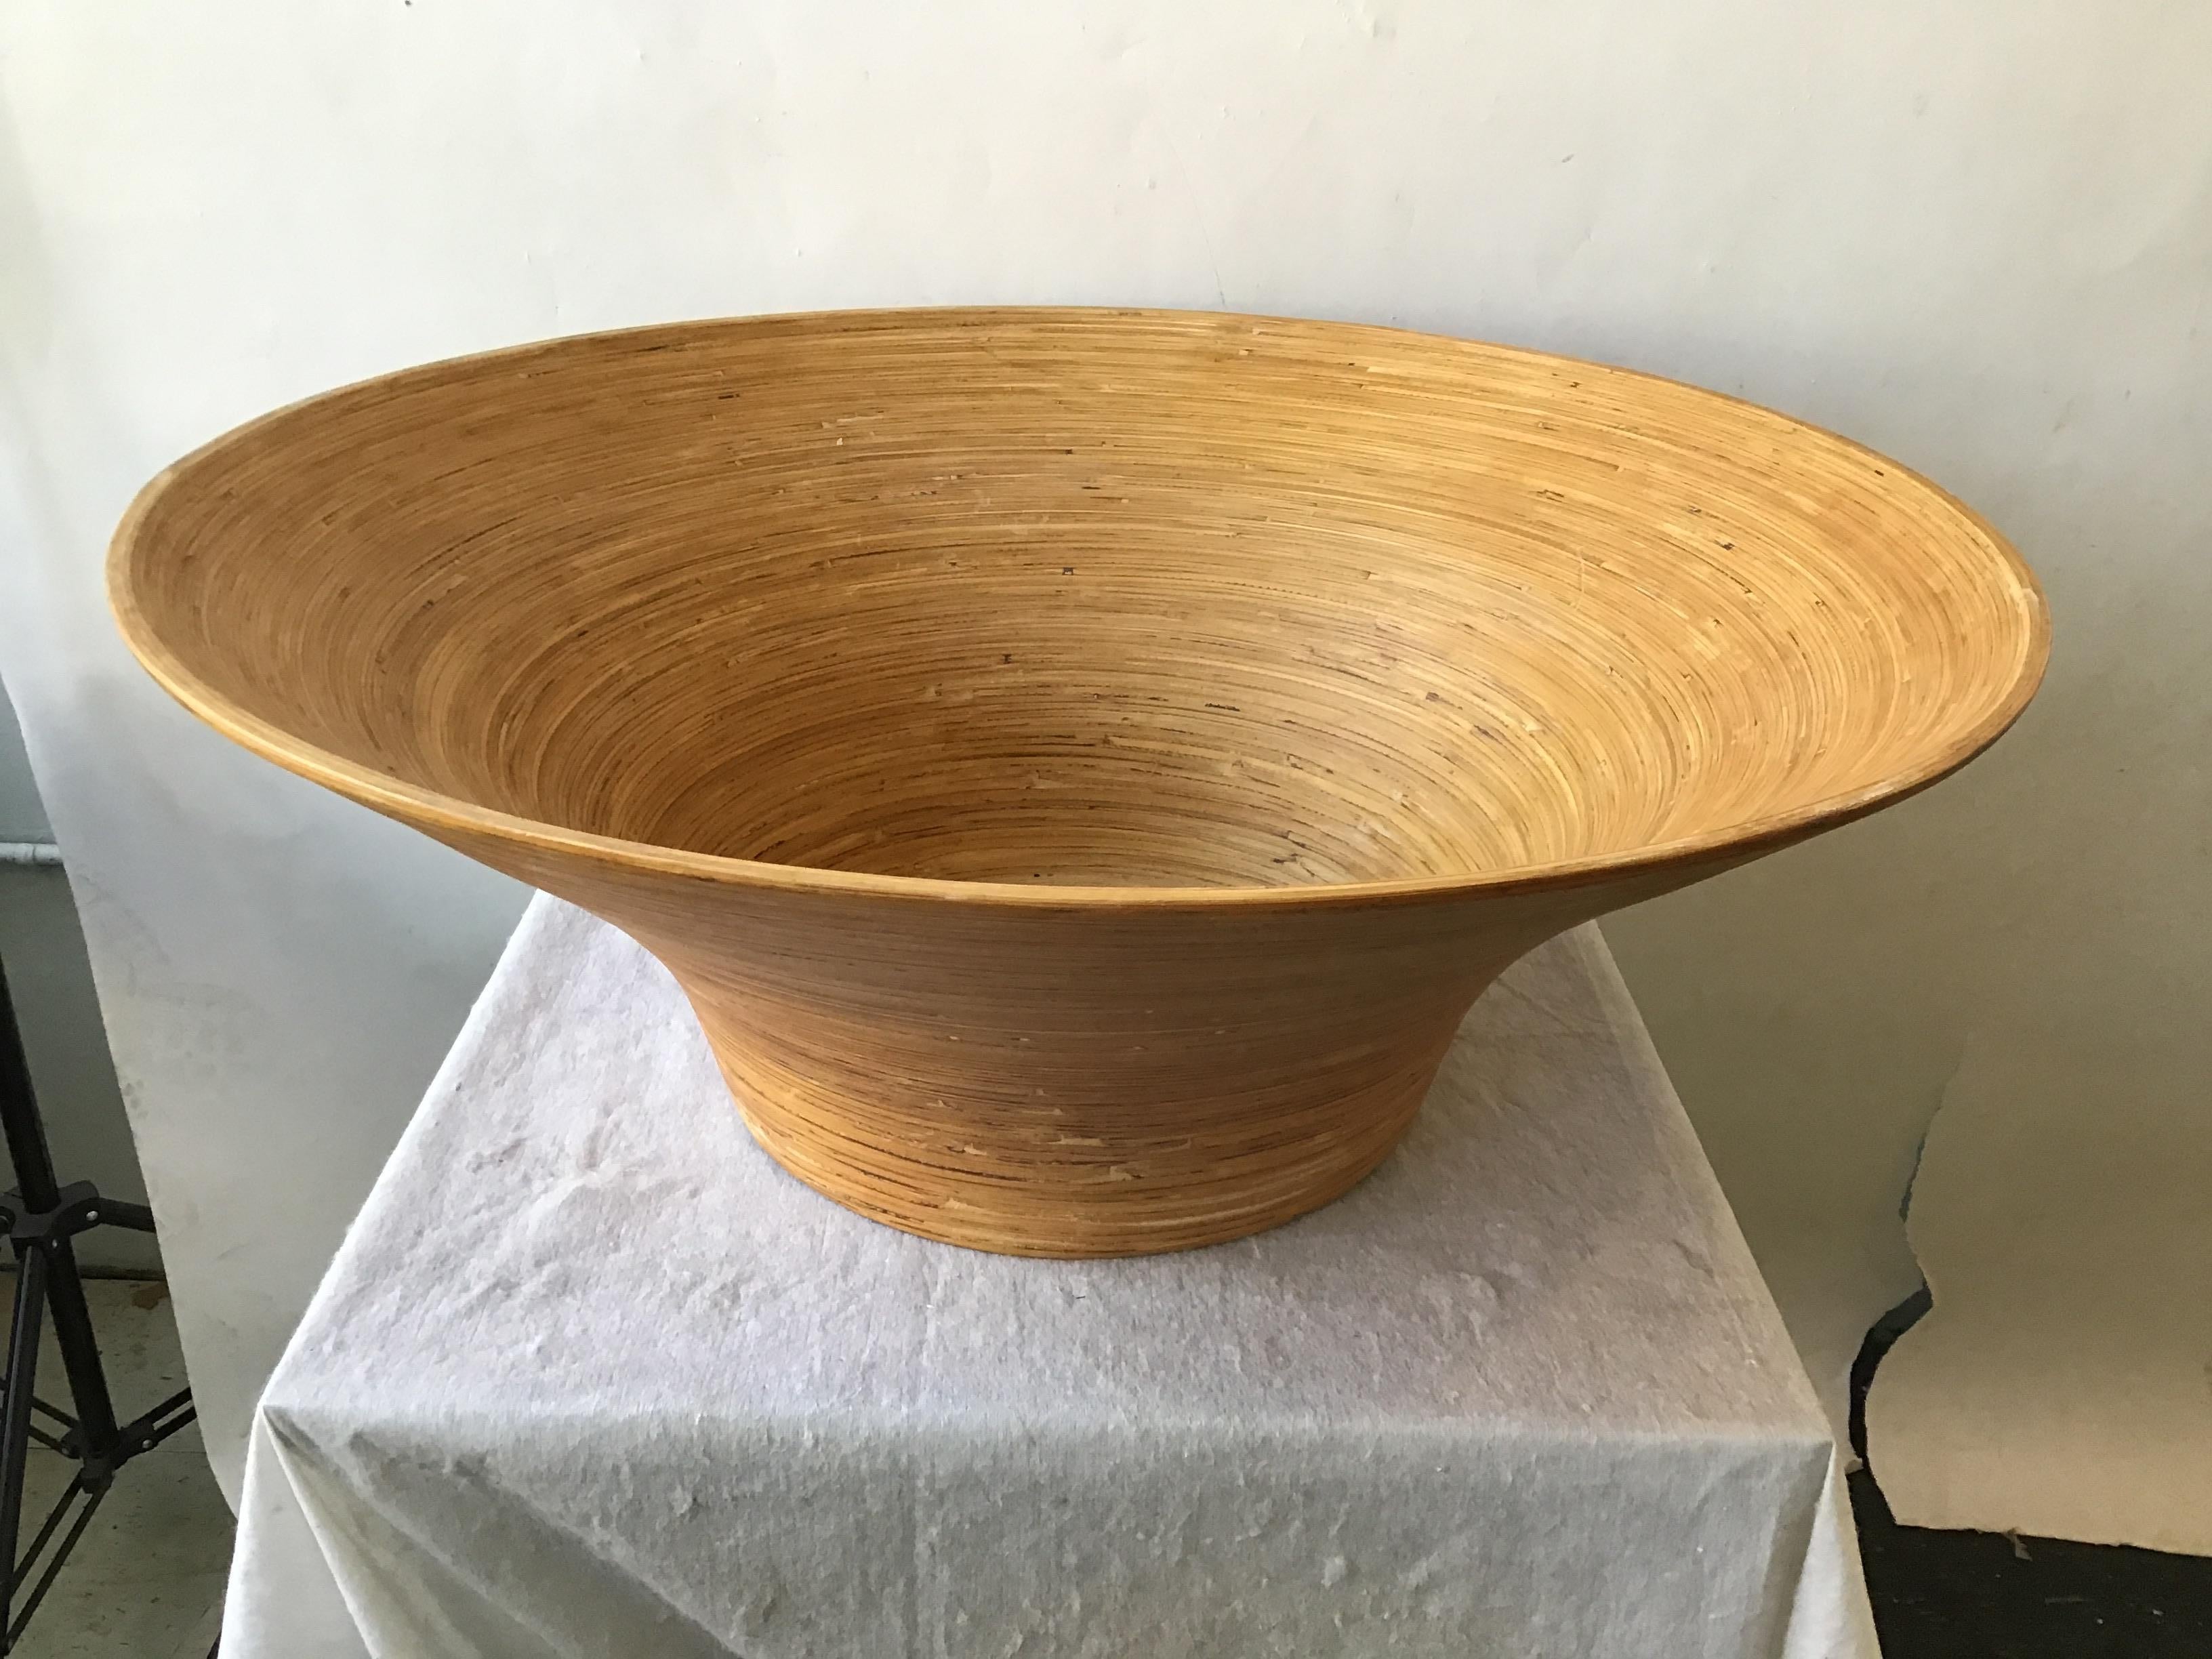 Huge bamboo bowl from a Southampton, NY estate.
This item can be shipped by UPS.